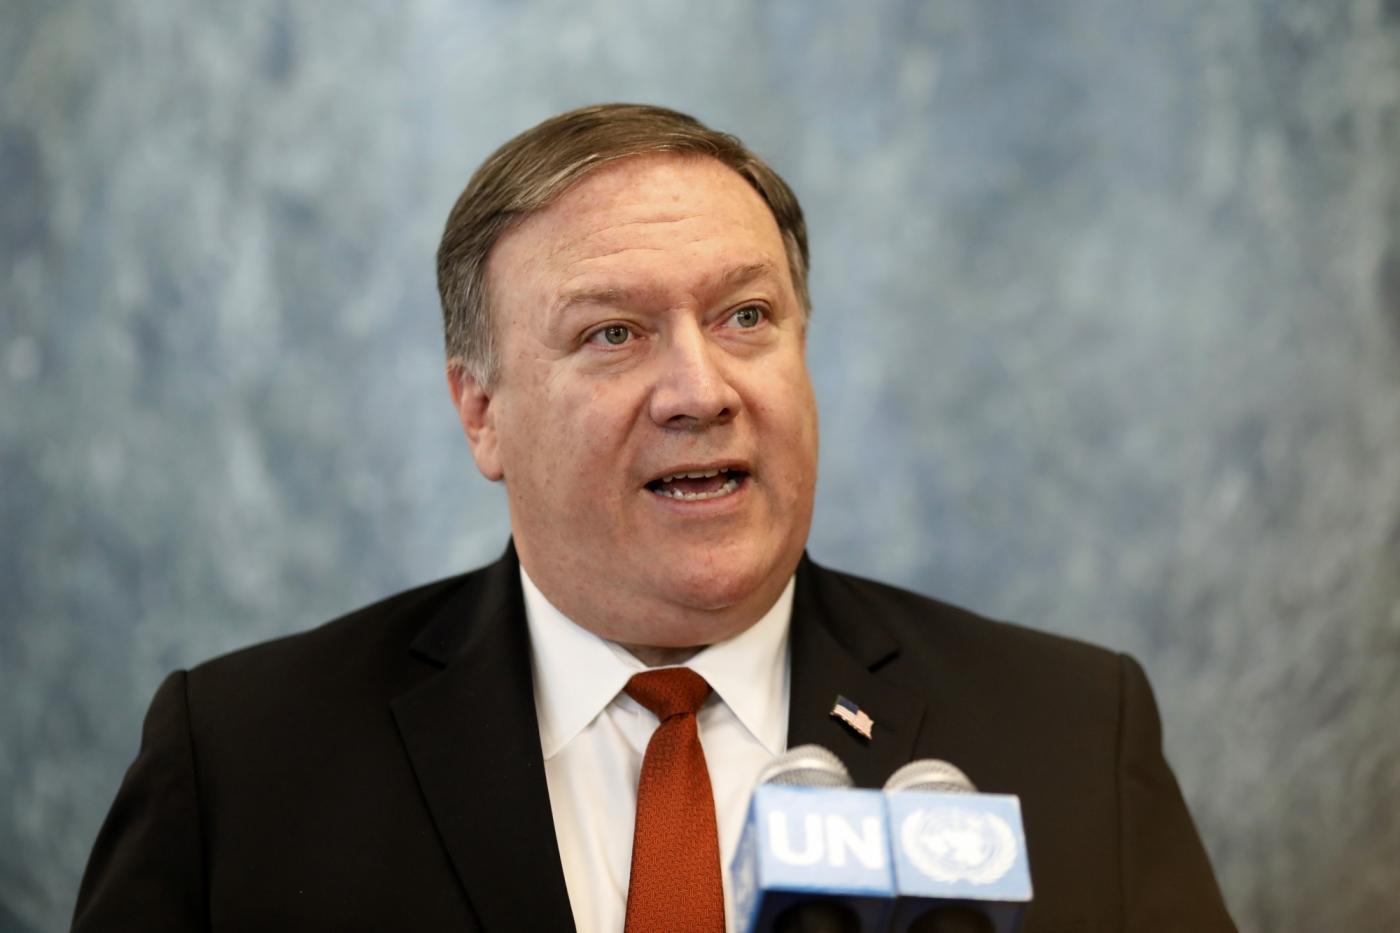 UNITED NATIONS, July 20, 2018 (Xinhua) -- U.S. Secretary of State Mike Pompeo speaks to reporters at the UN headquarters in New York, July 20, 2018. Pompeo said on Friday that U.S. President Donald Trump and Russian President Vladimir Putin began discussing the return of millions of Syrian refugees. (Xinhua/Li Muzi/IANS) by .